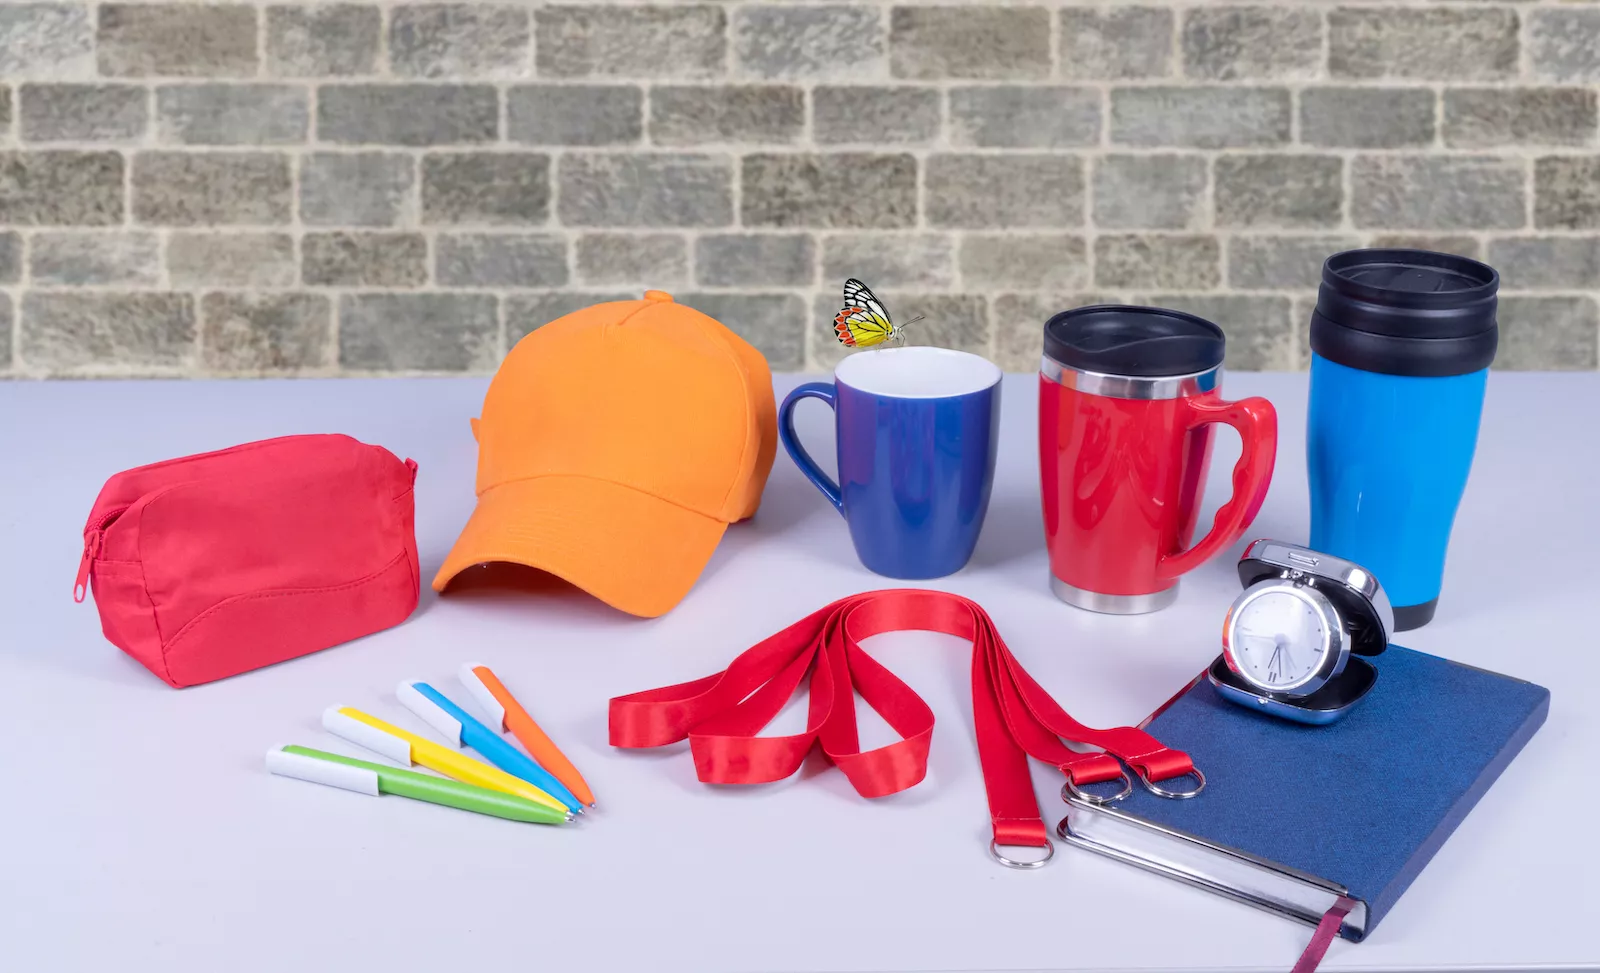 Are Promotional Gift Items Effective? - Upper Case